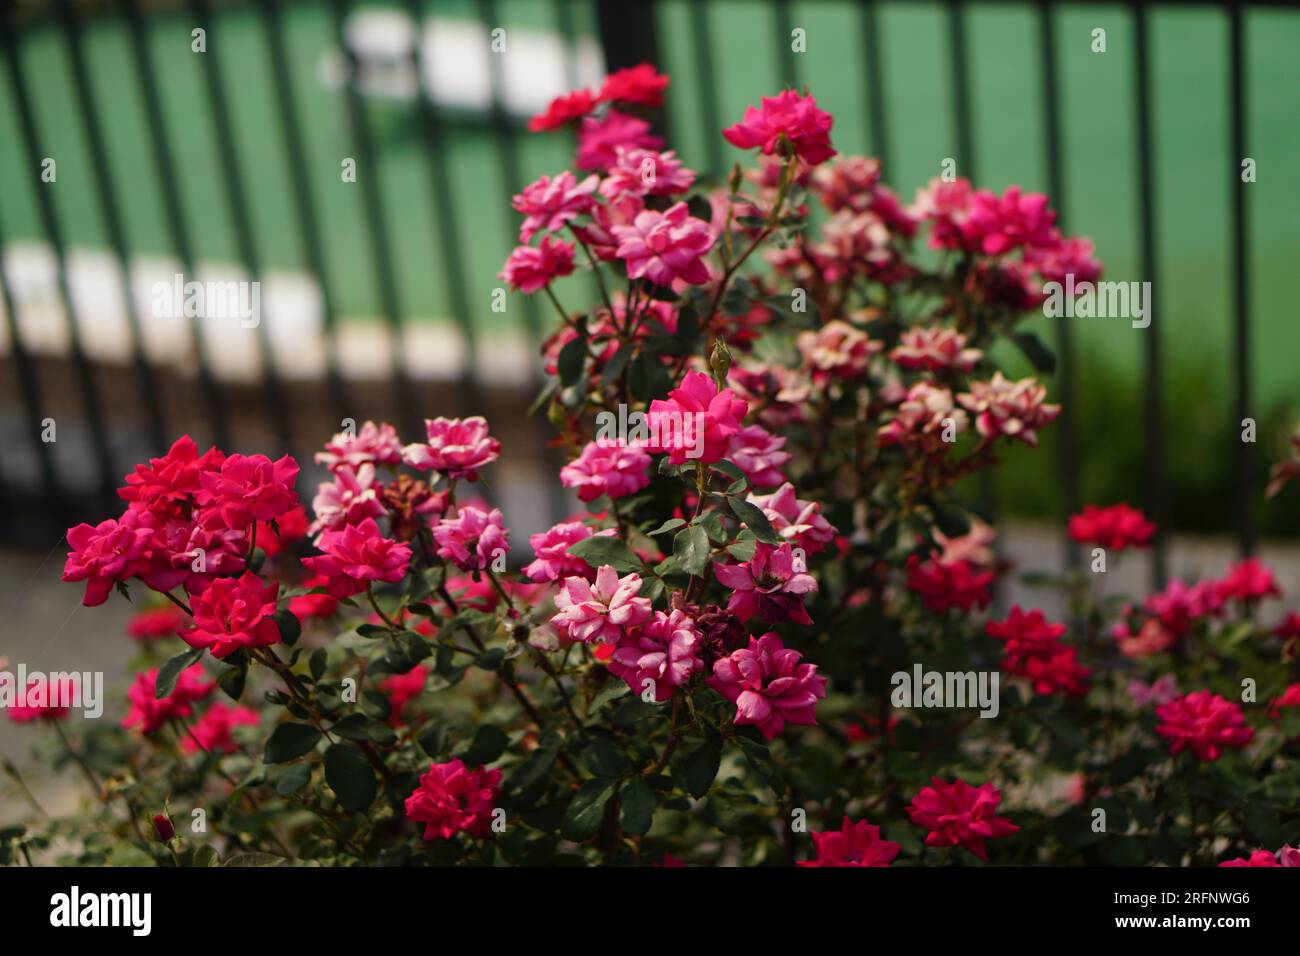 A bush of flowers in front of a fence. The flowers come in varying shades of pink. Stock Photo